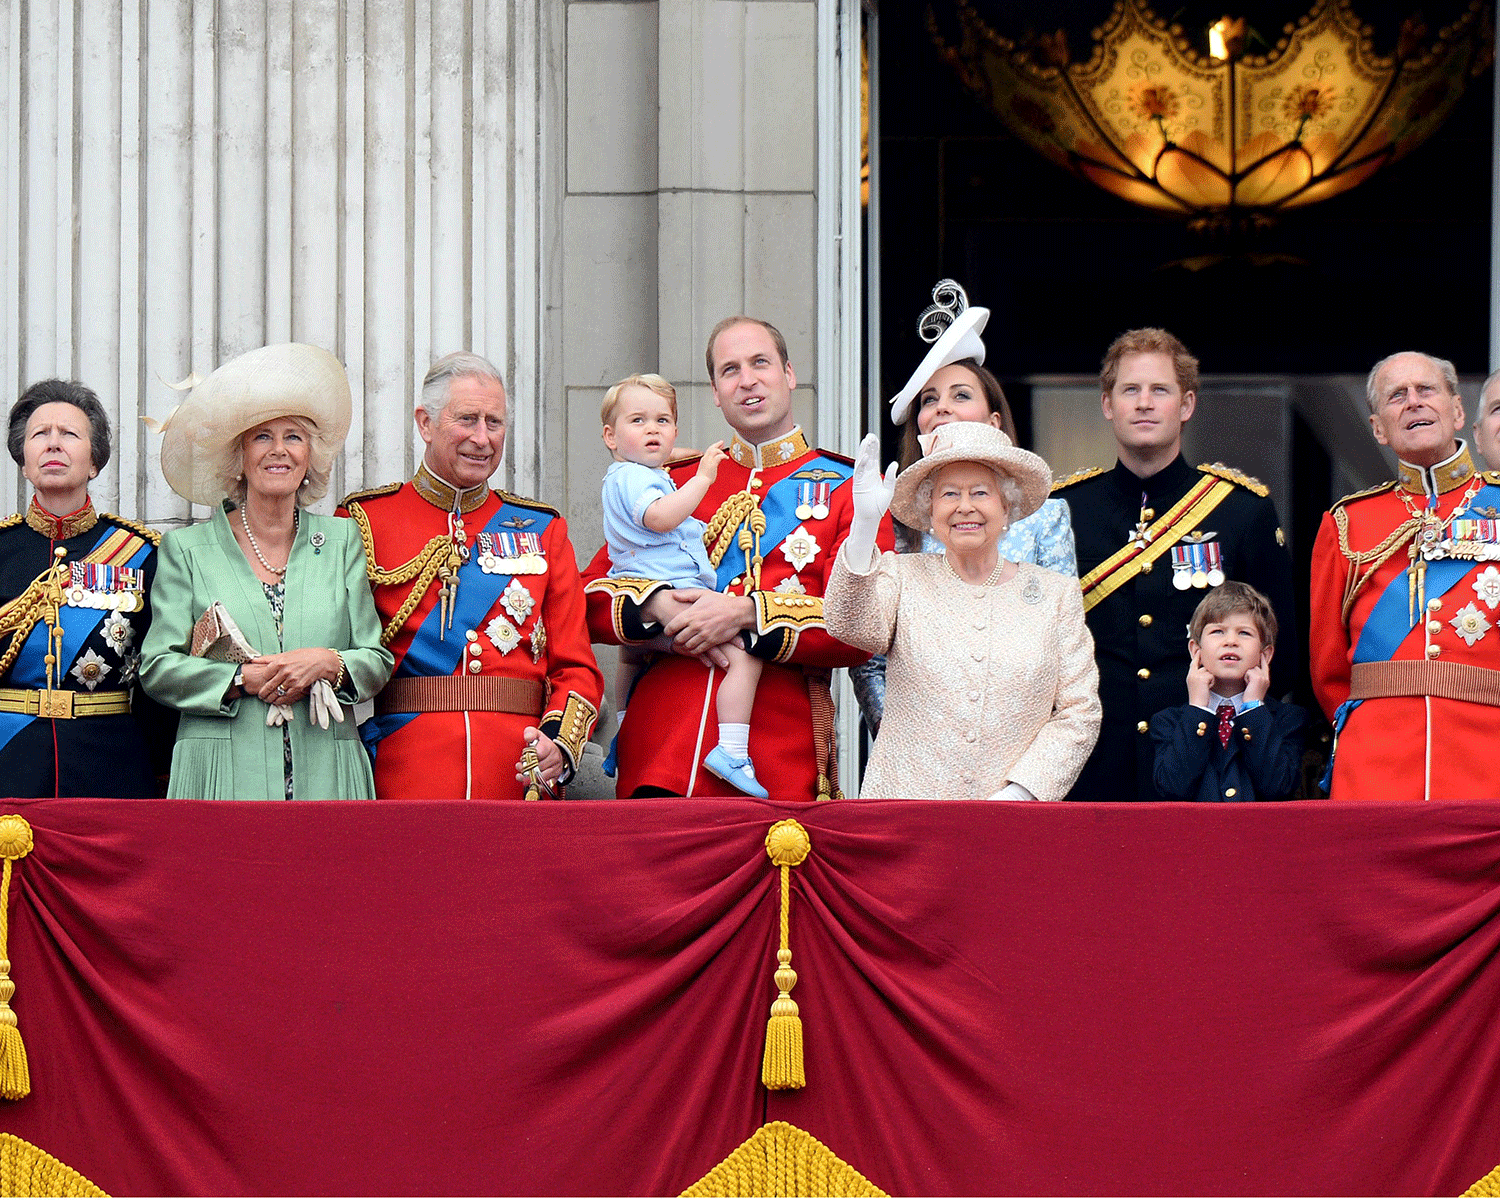 Prince George with the Duke and Catherine Duchess of Cambridge and other members of the Royal family on the balcony at Buckingham Palace for Trooping the Colour